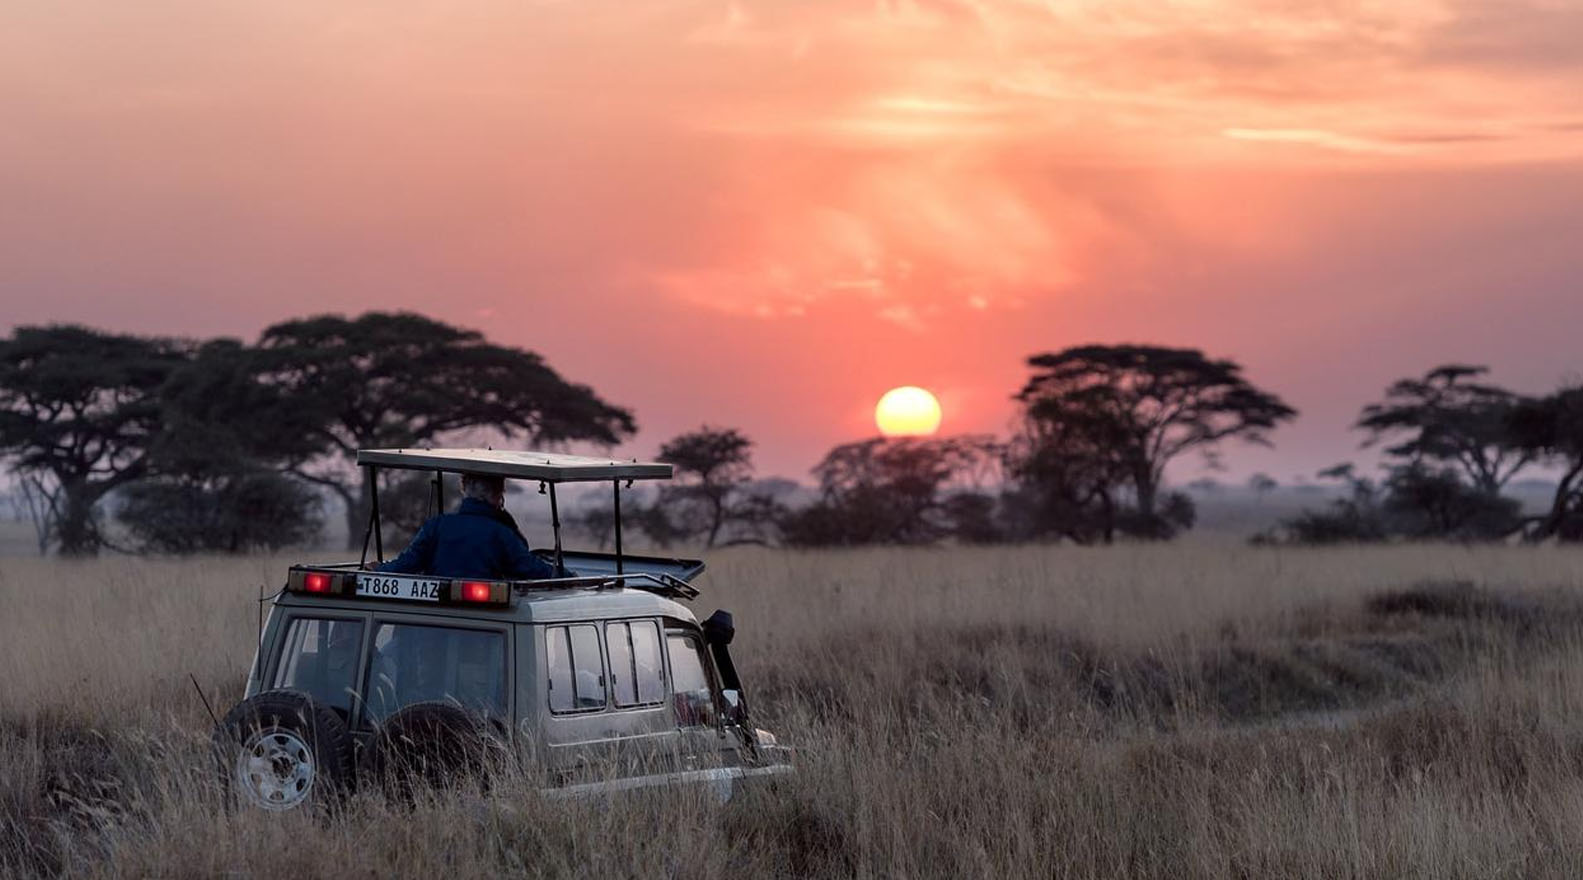 How Much Does It Cost To Visit Serengeti National Park